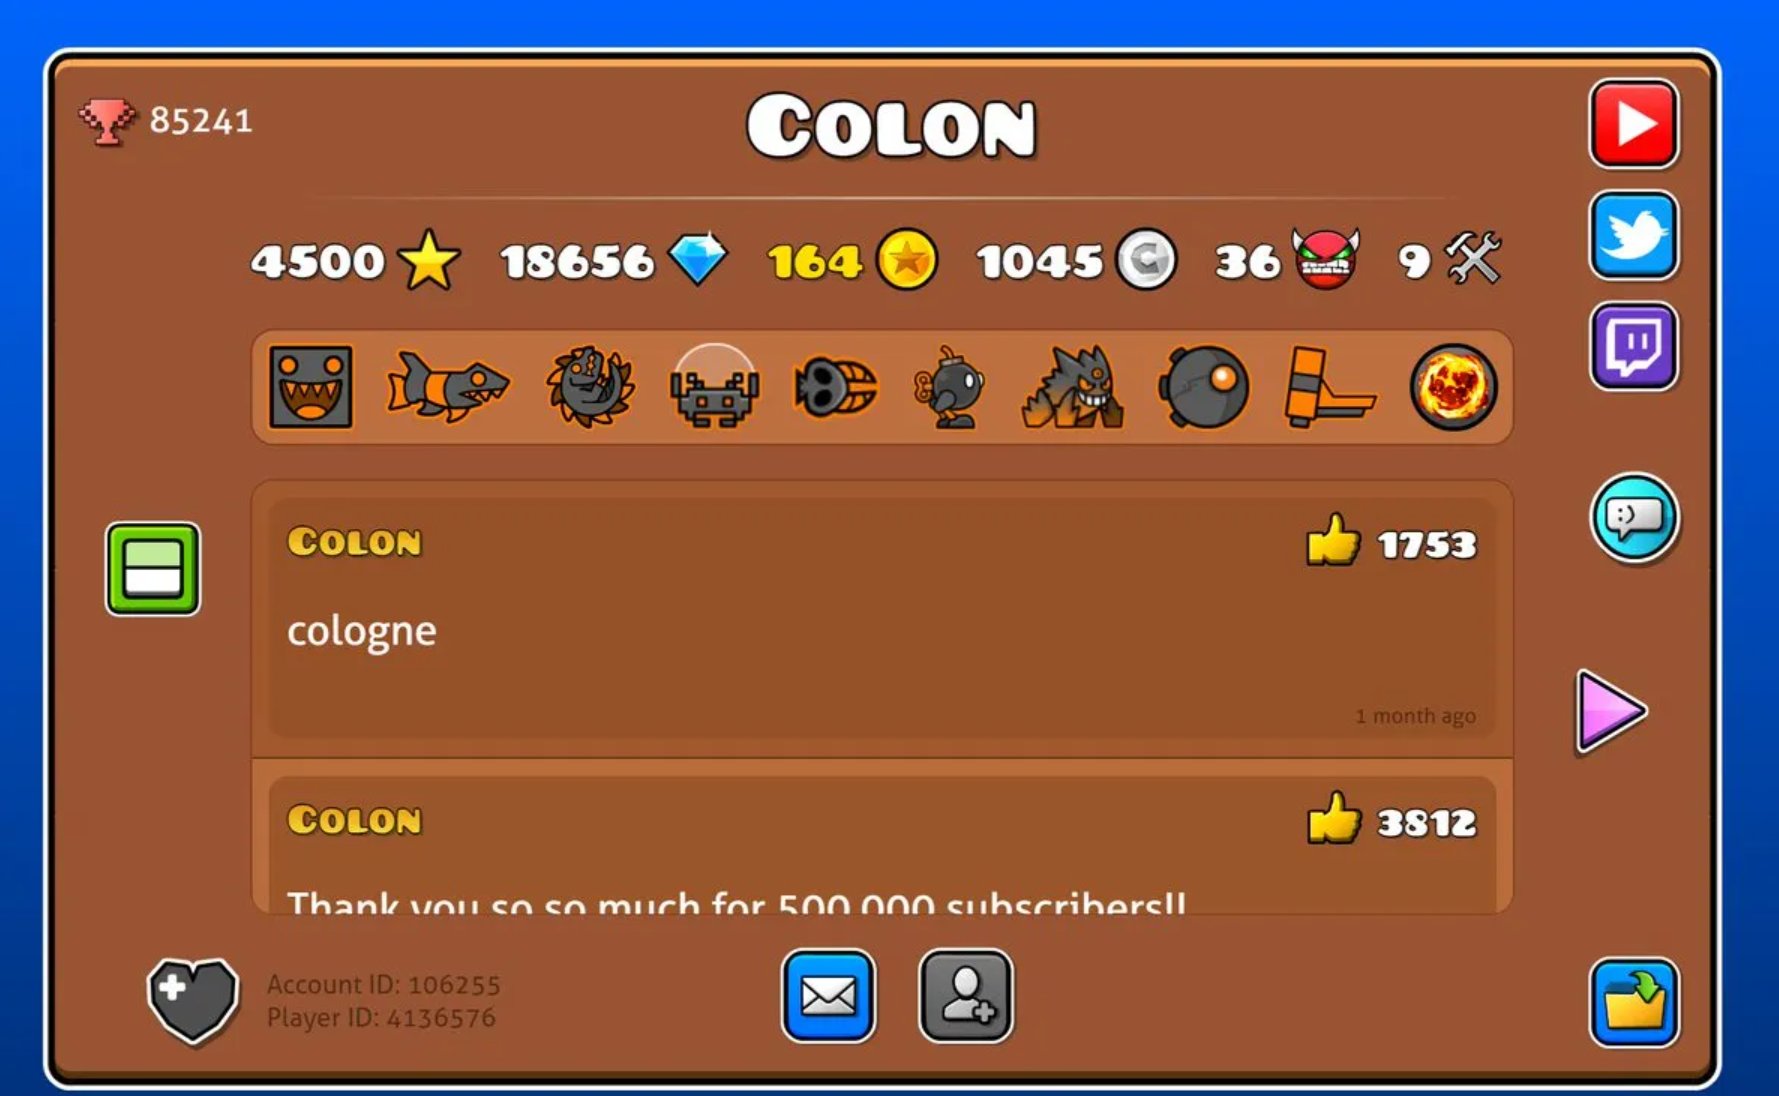 Geometry Dash Servers Display Up To 164 Secret Coins In Preparation For 2.2